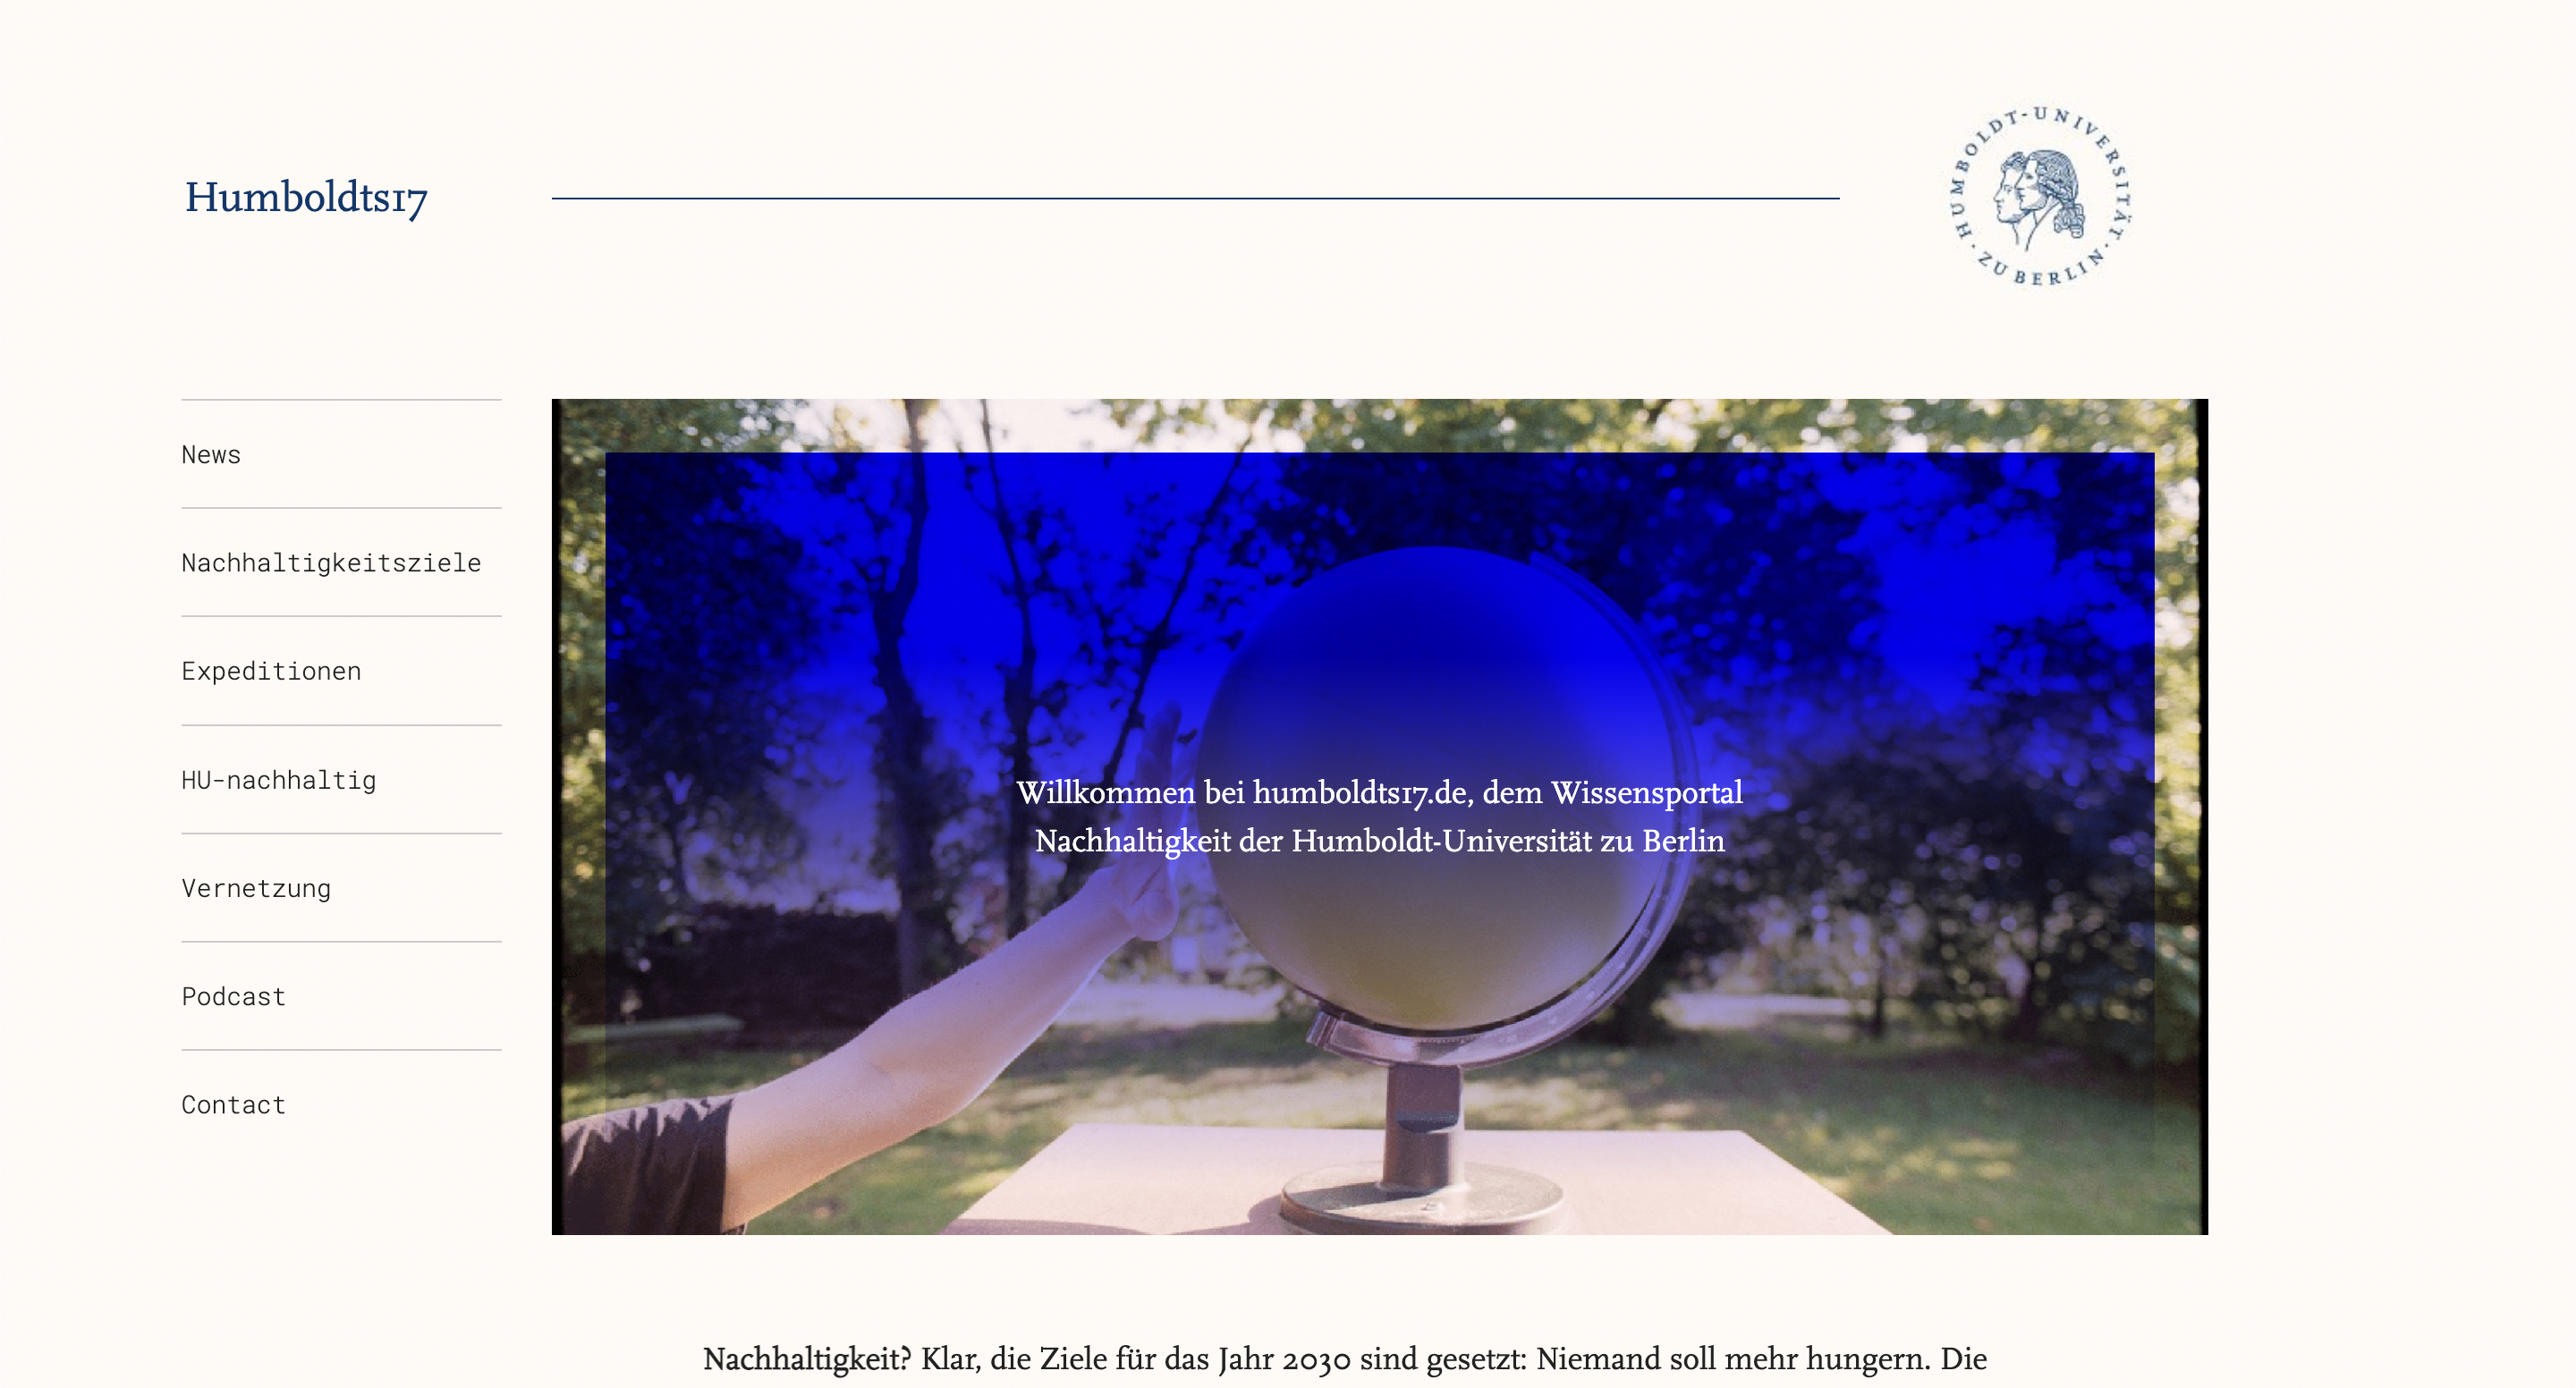 A clean and light webpage design. Menu on the left, the seal of the humboldt university on the top right. A huge image of a hand touching a globe that is standing in a sunny garden is in the center.